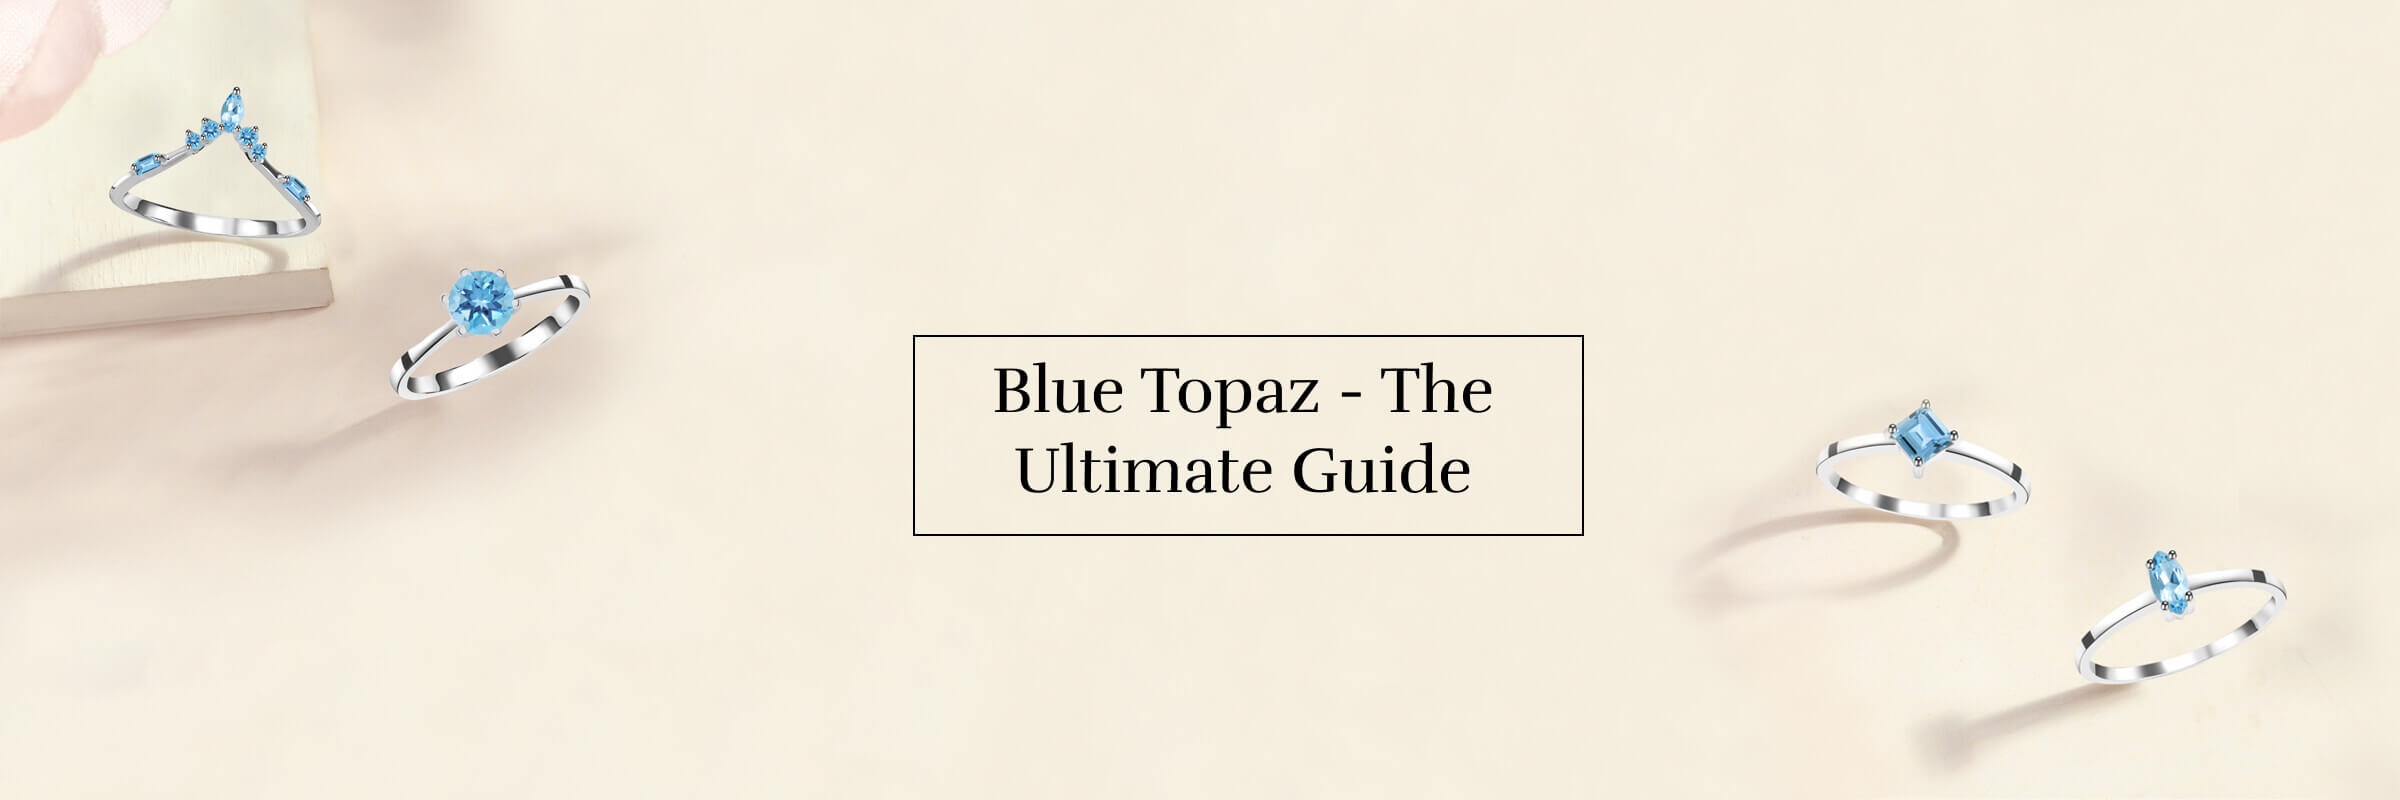 Blue Topaz Meaning and Uses